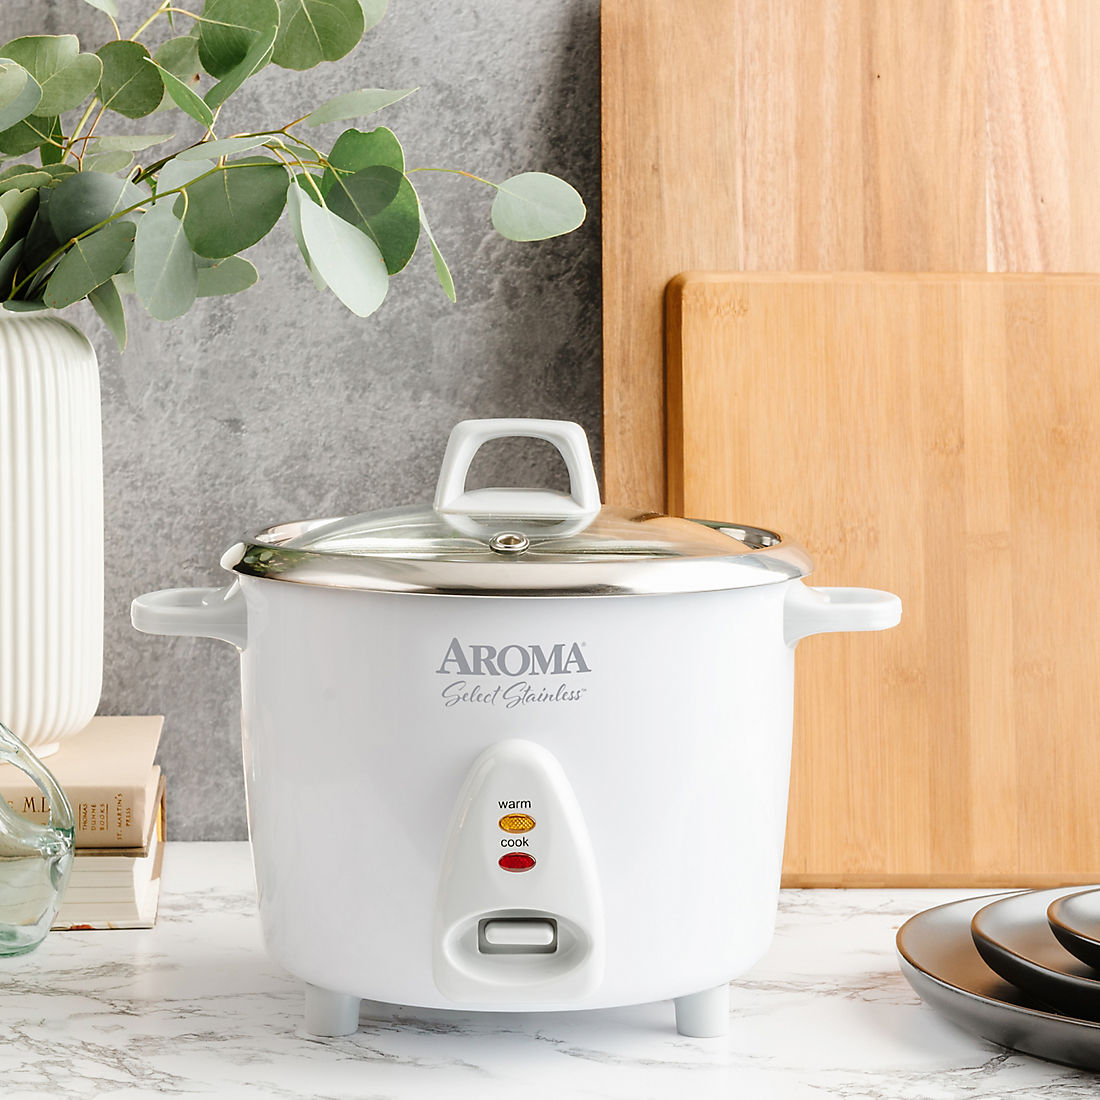 Aroma Housewares 14-Cup Cooked 3qt. Select Stainless Pot-Style Rice Cooker, Food Steamer, One-Touch Operation, Automatic Keep Warm Mode, White